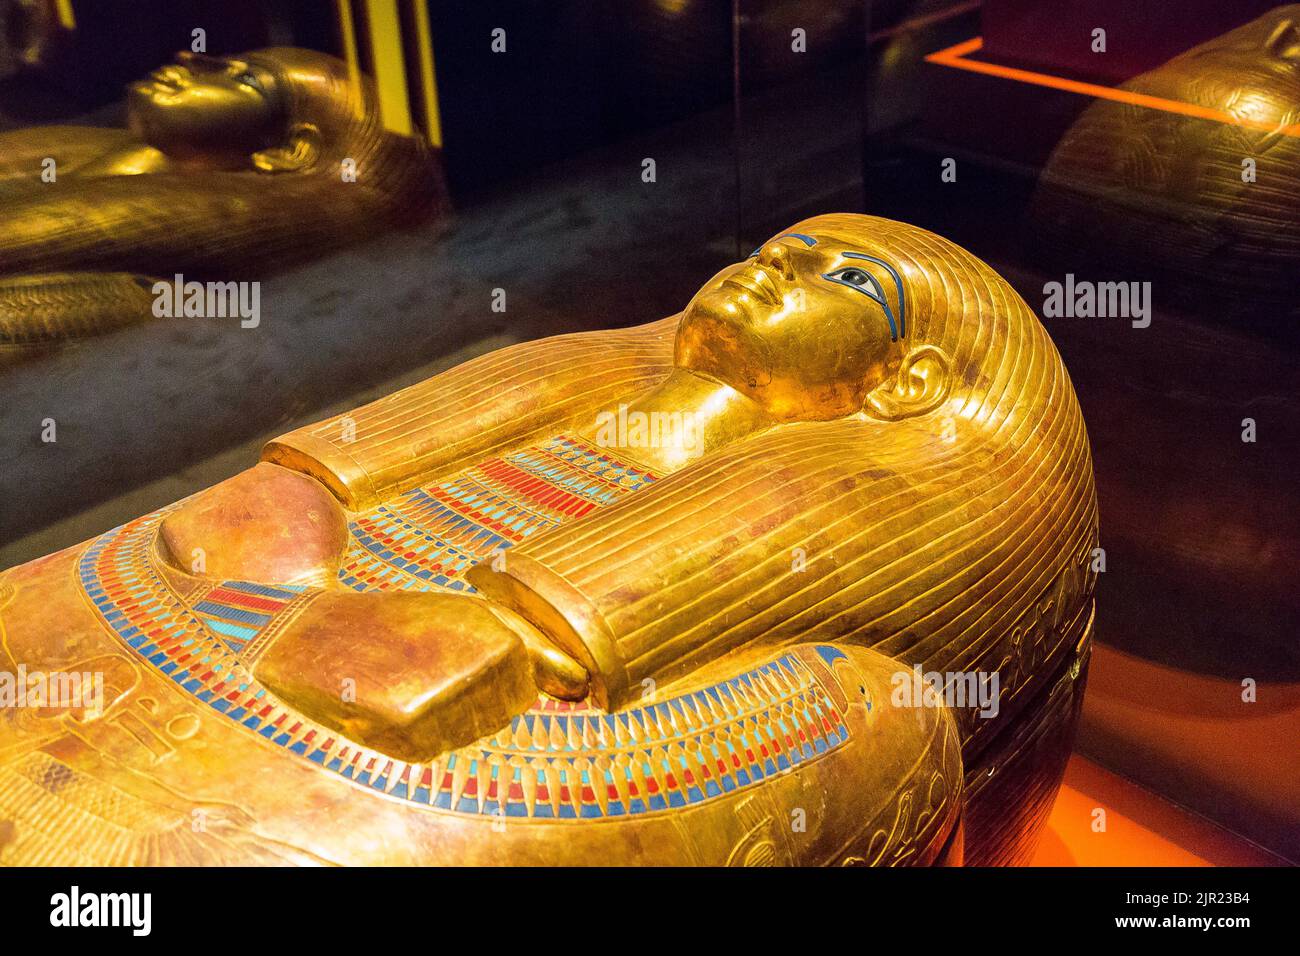 Egypt, Cairo, Egyptian Museum, from the tomb of Yuya and Thuya in Luxor : Mummy-shaped (second) coffin of Thuya. Stock Photo